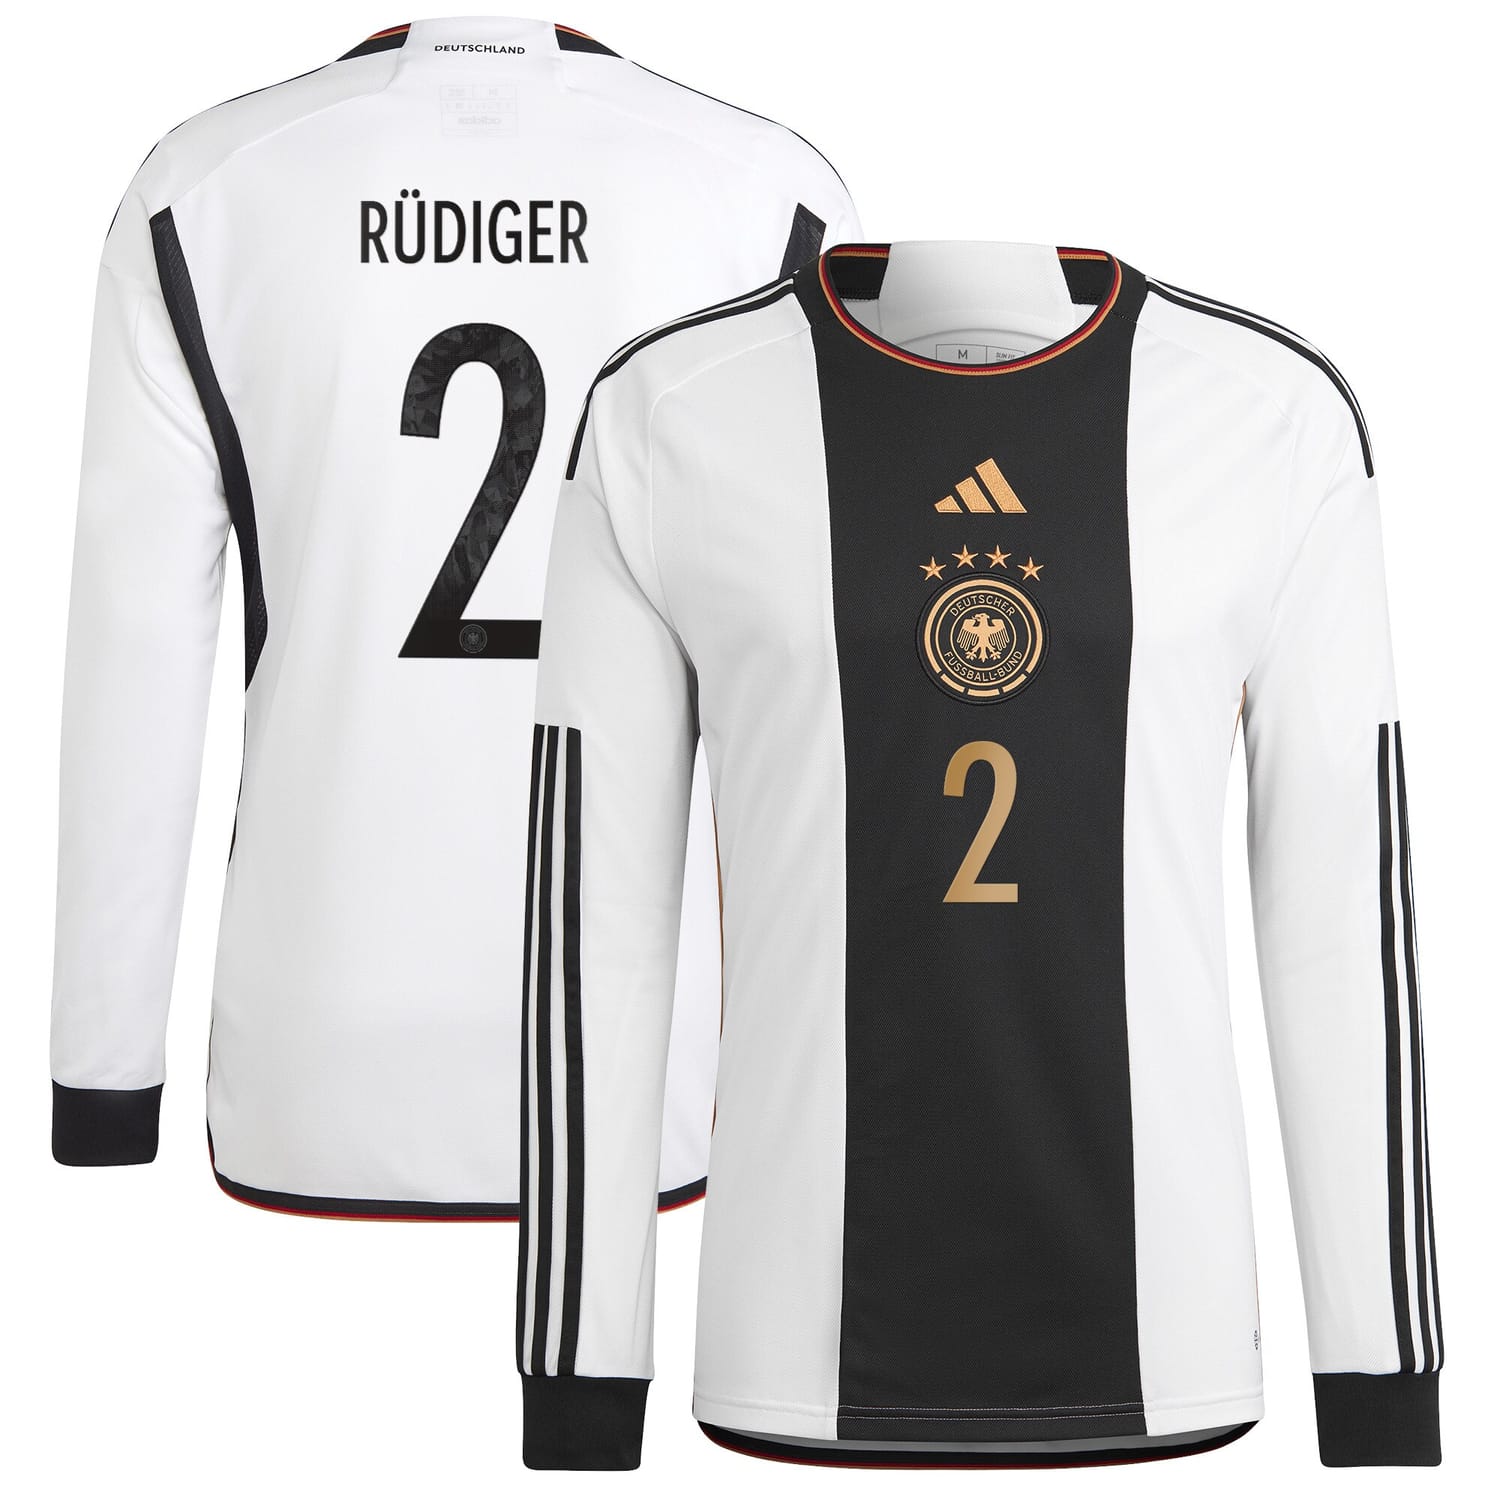 Germany National Team Home Jersey Shirt Long Sleeve player Antonio Rüdiger 2 printing for Men